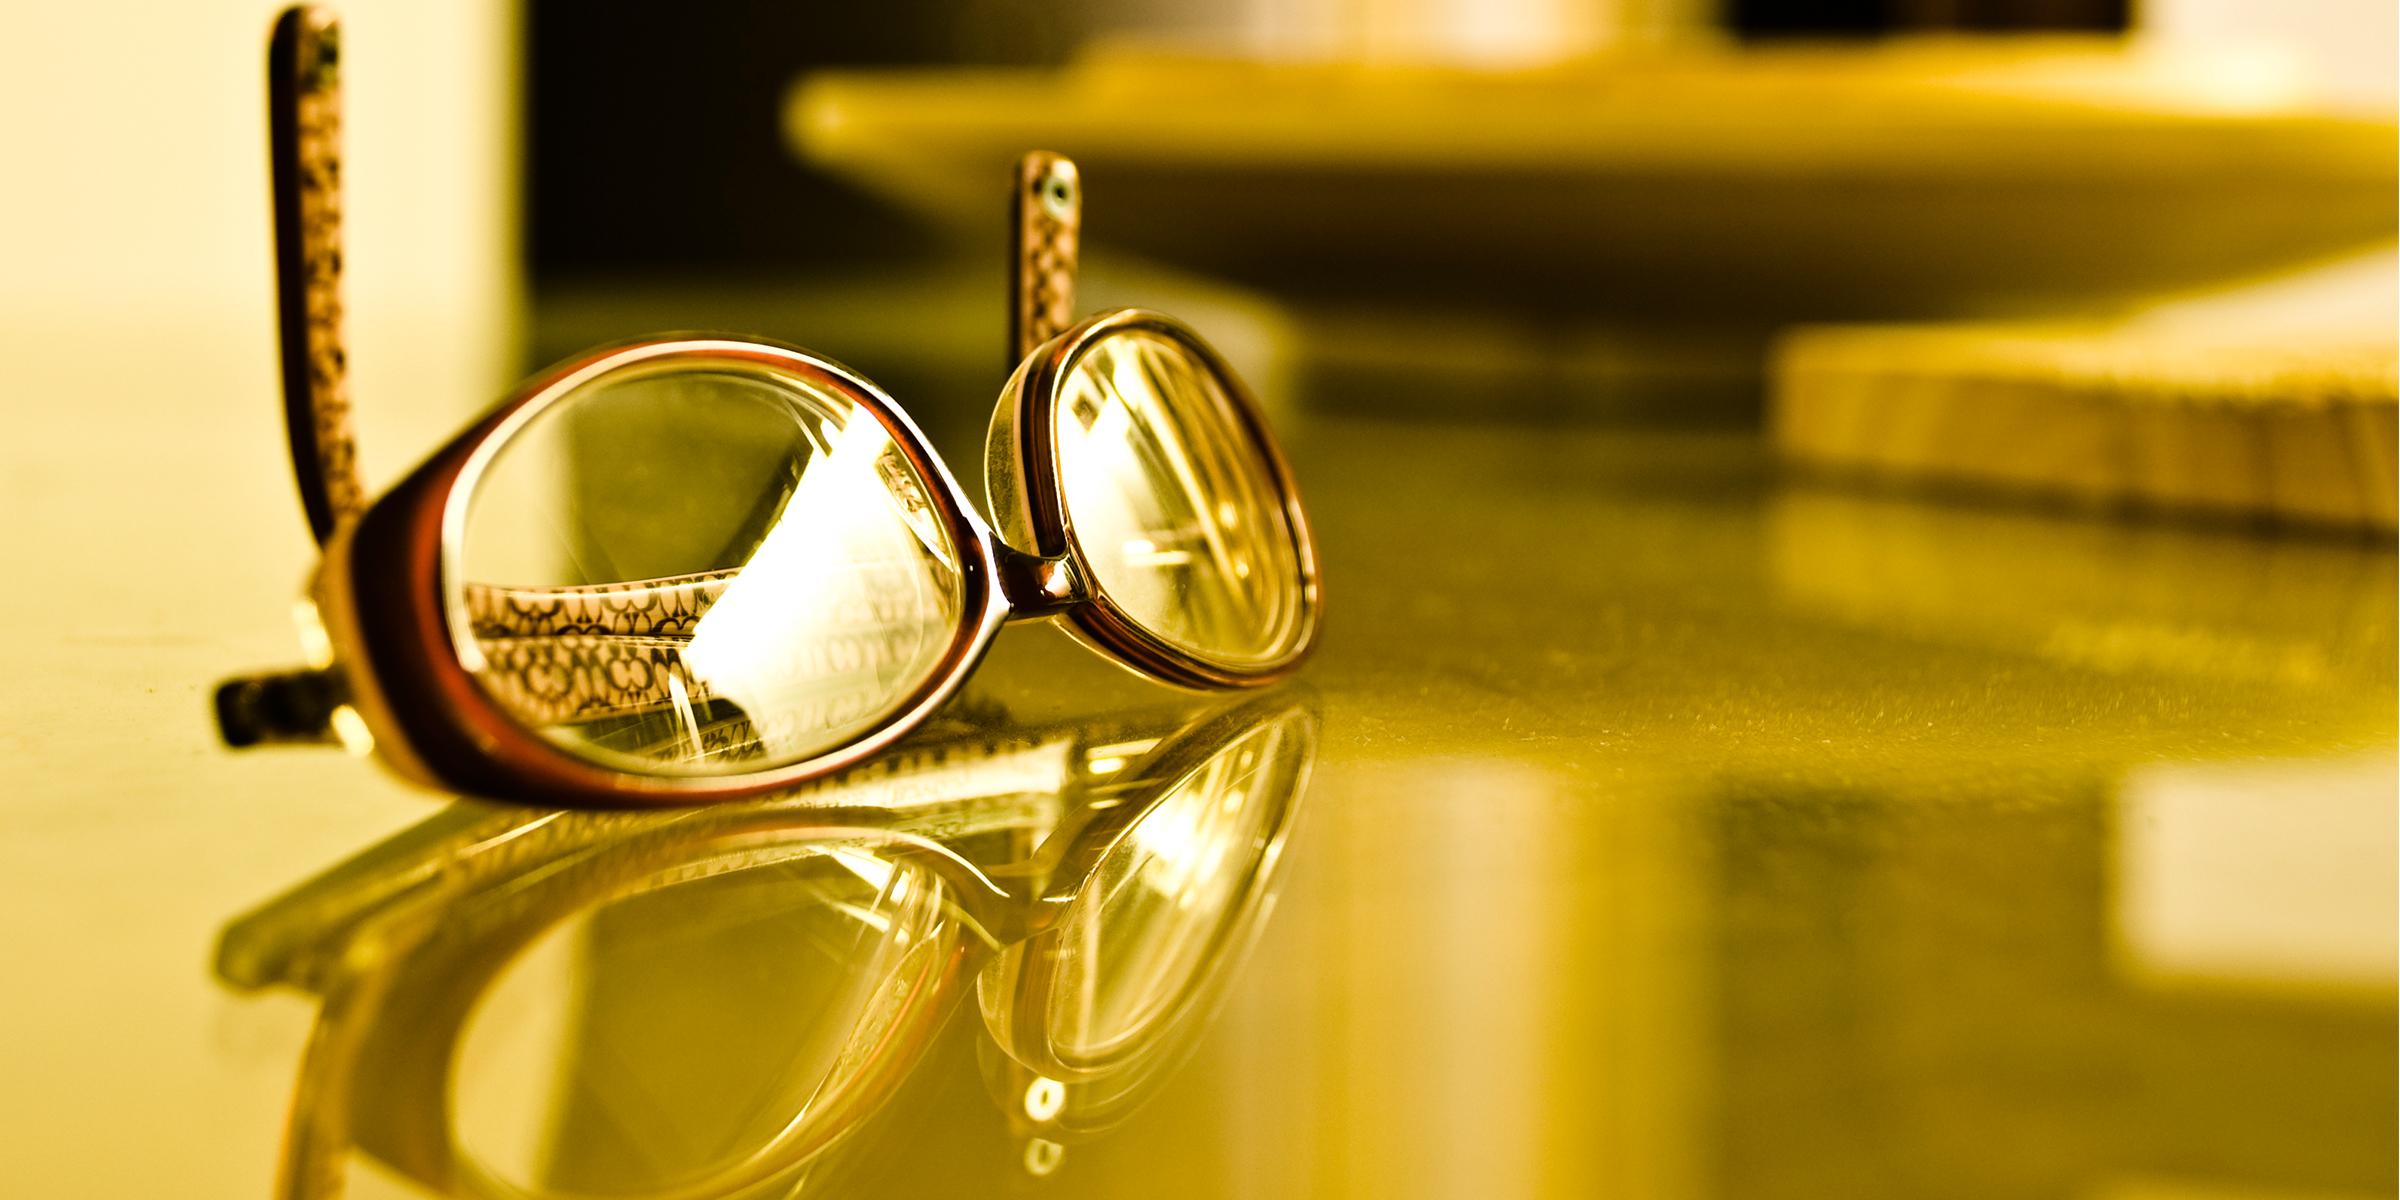 Spectacles on a desk